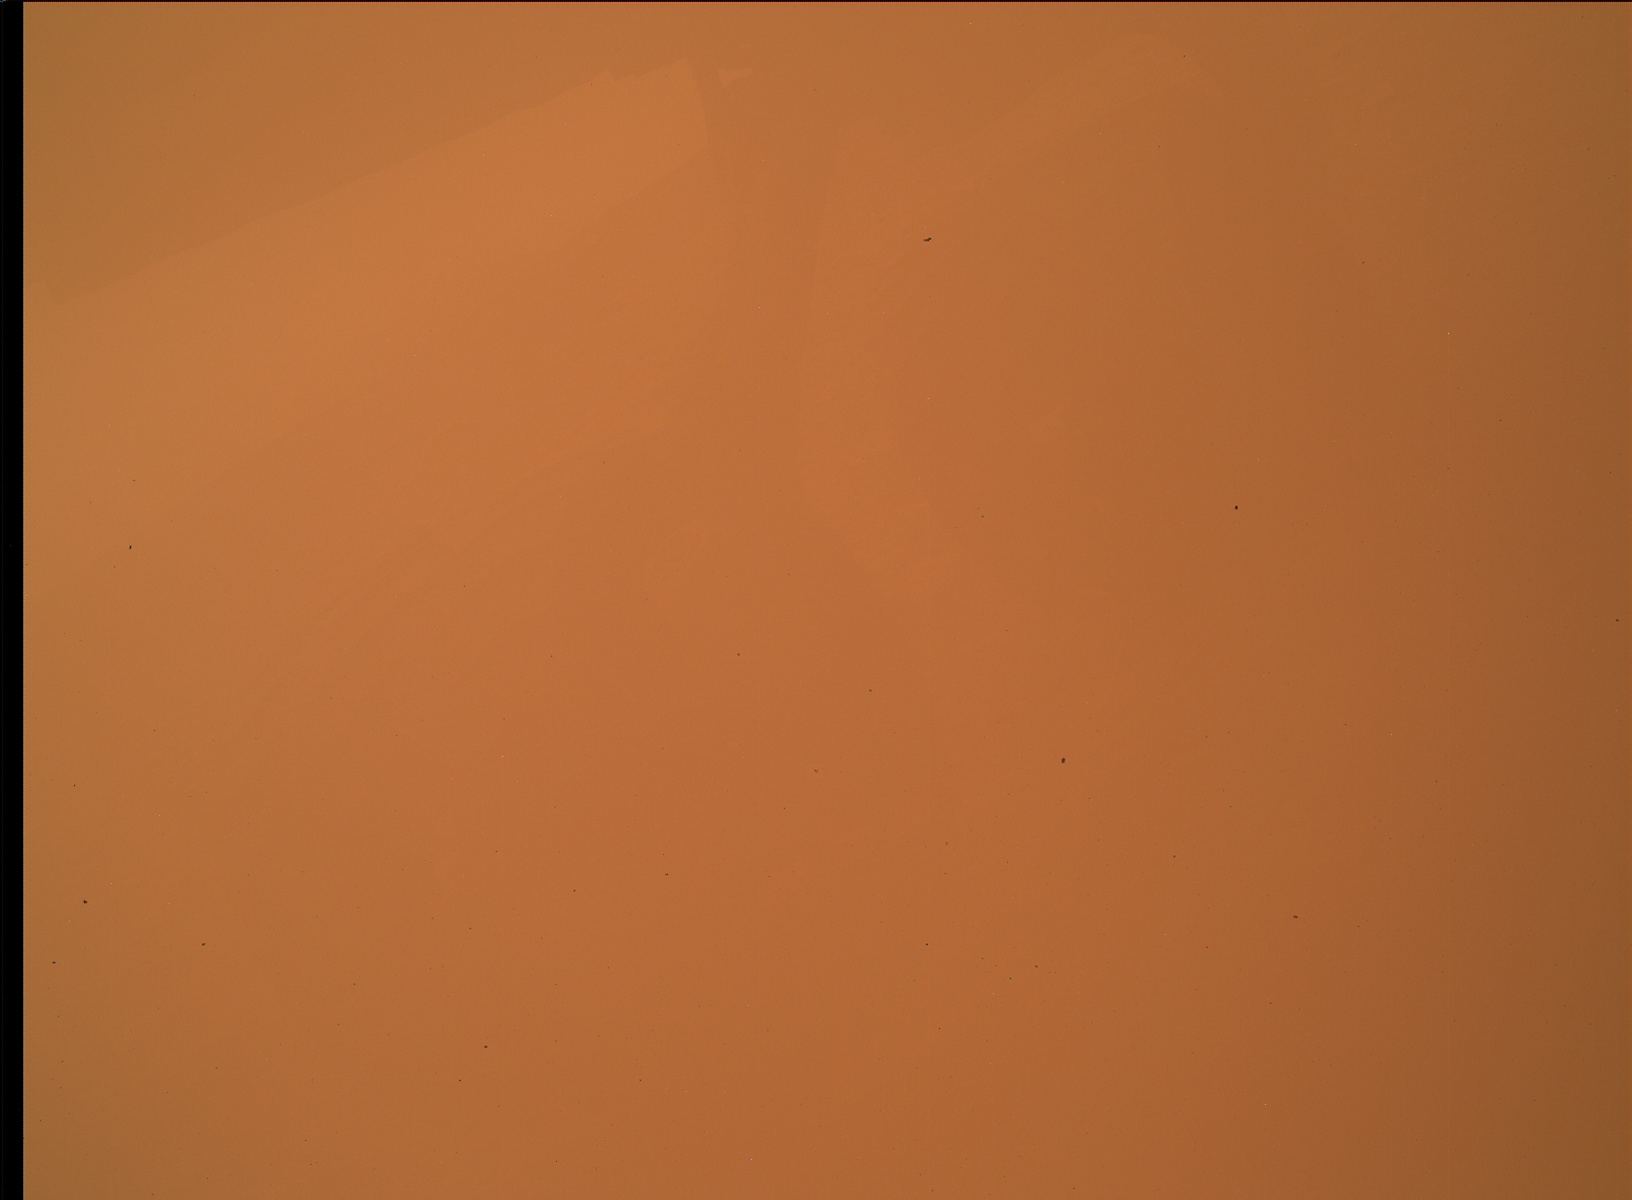 Nasa's Mars rover Curiosity acquired this image using its Mars Hand Lens Imager (MAHLI) on Sol 2114